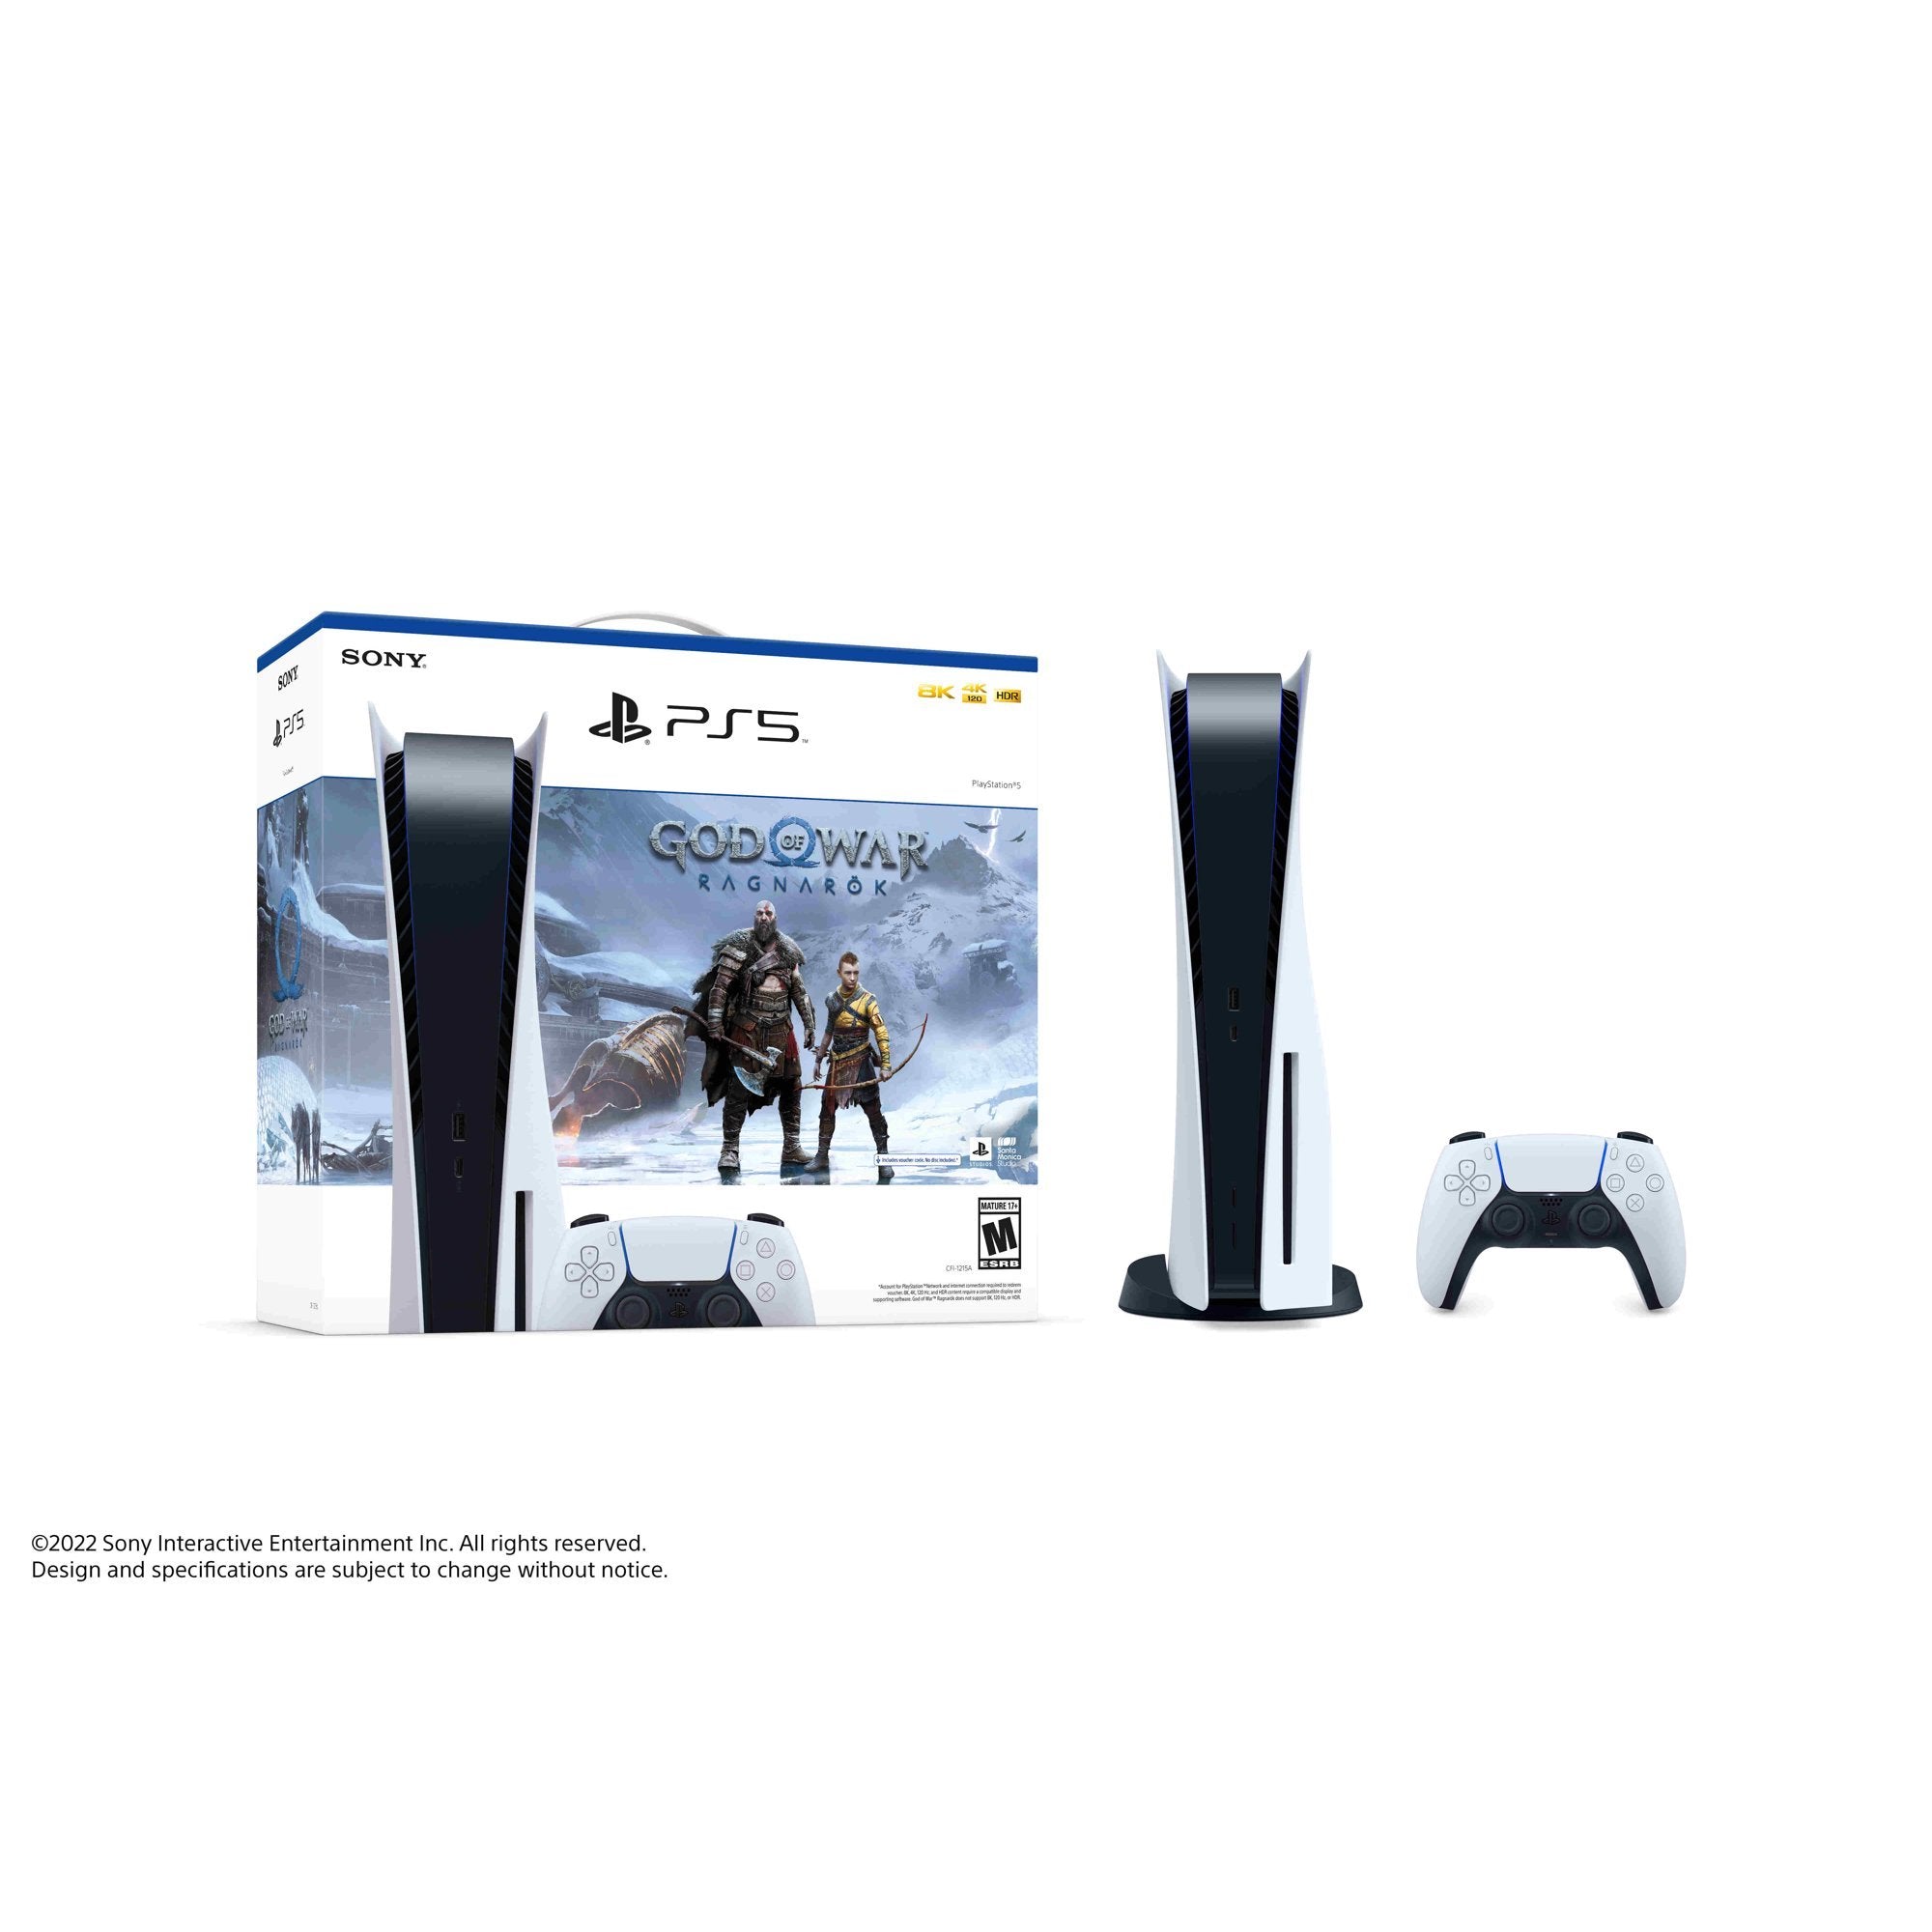 PlayStation 5 Disc Edition God of War Ragnarok Bundle with Two Controllers White and Galactic Purple DualSense and Mytrix Dual Controller Charger